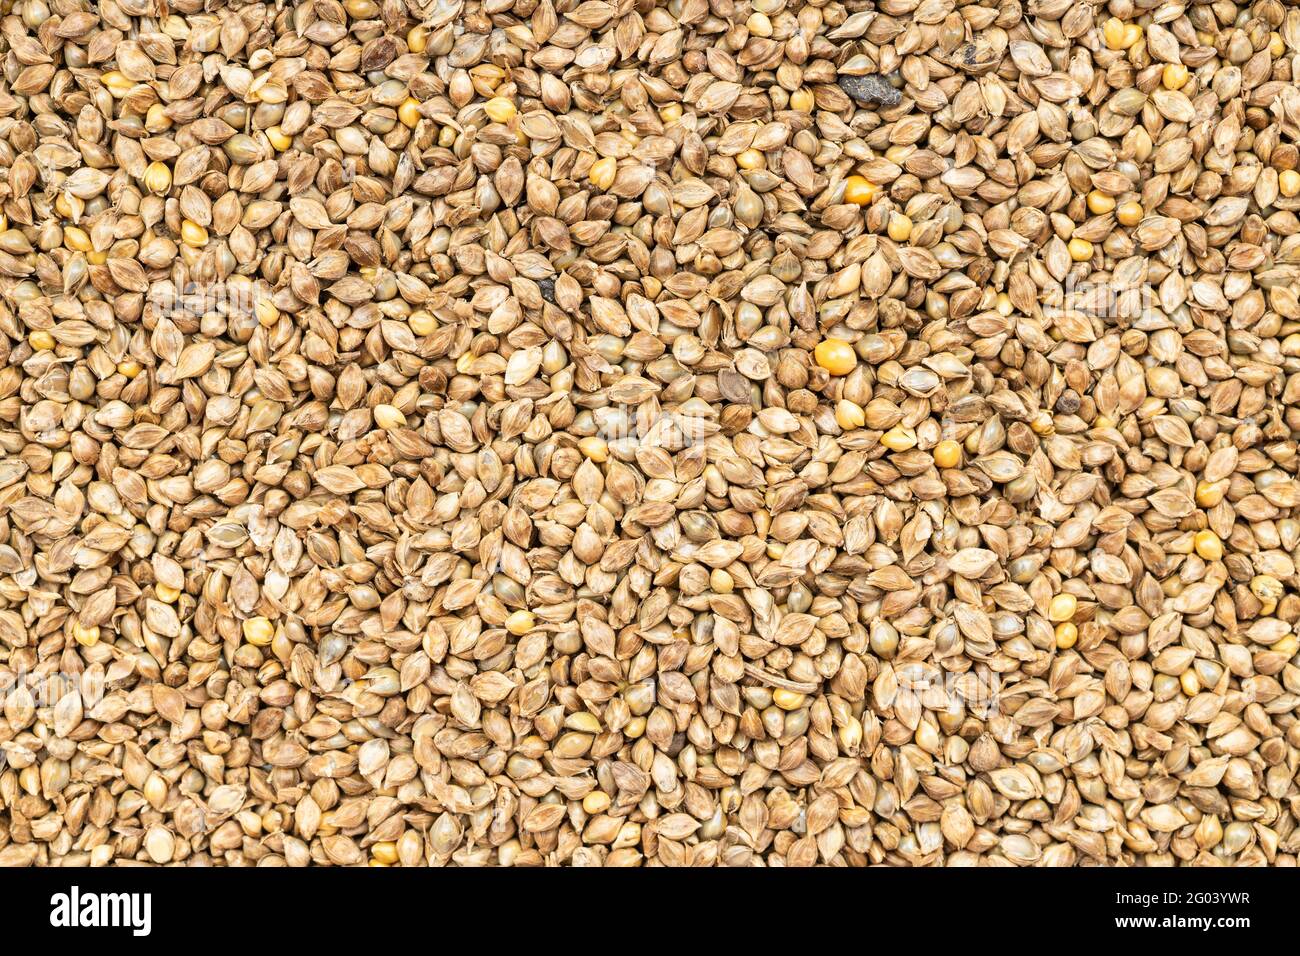 food background - whole-grain barnyard millet seeds close up Stock Photo